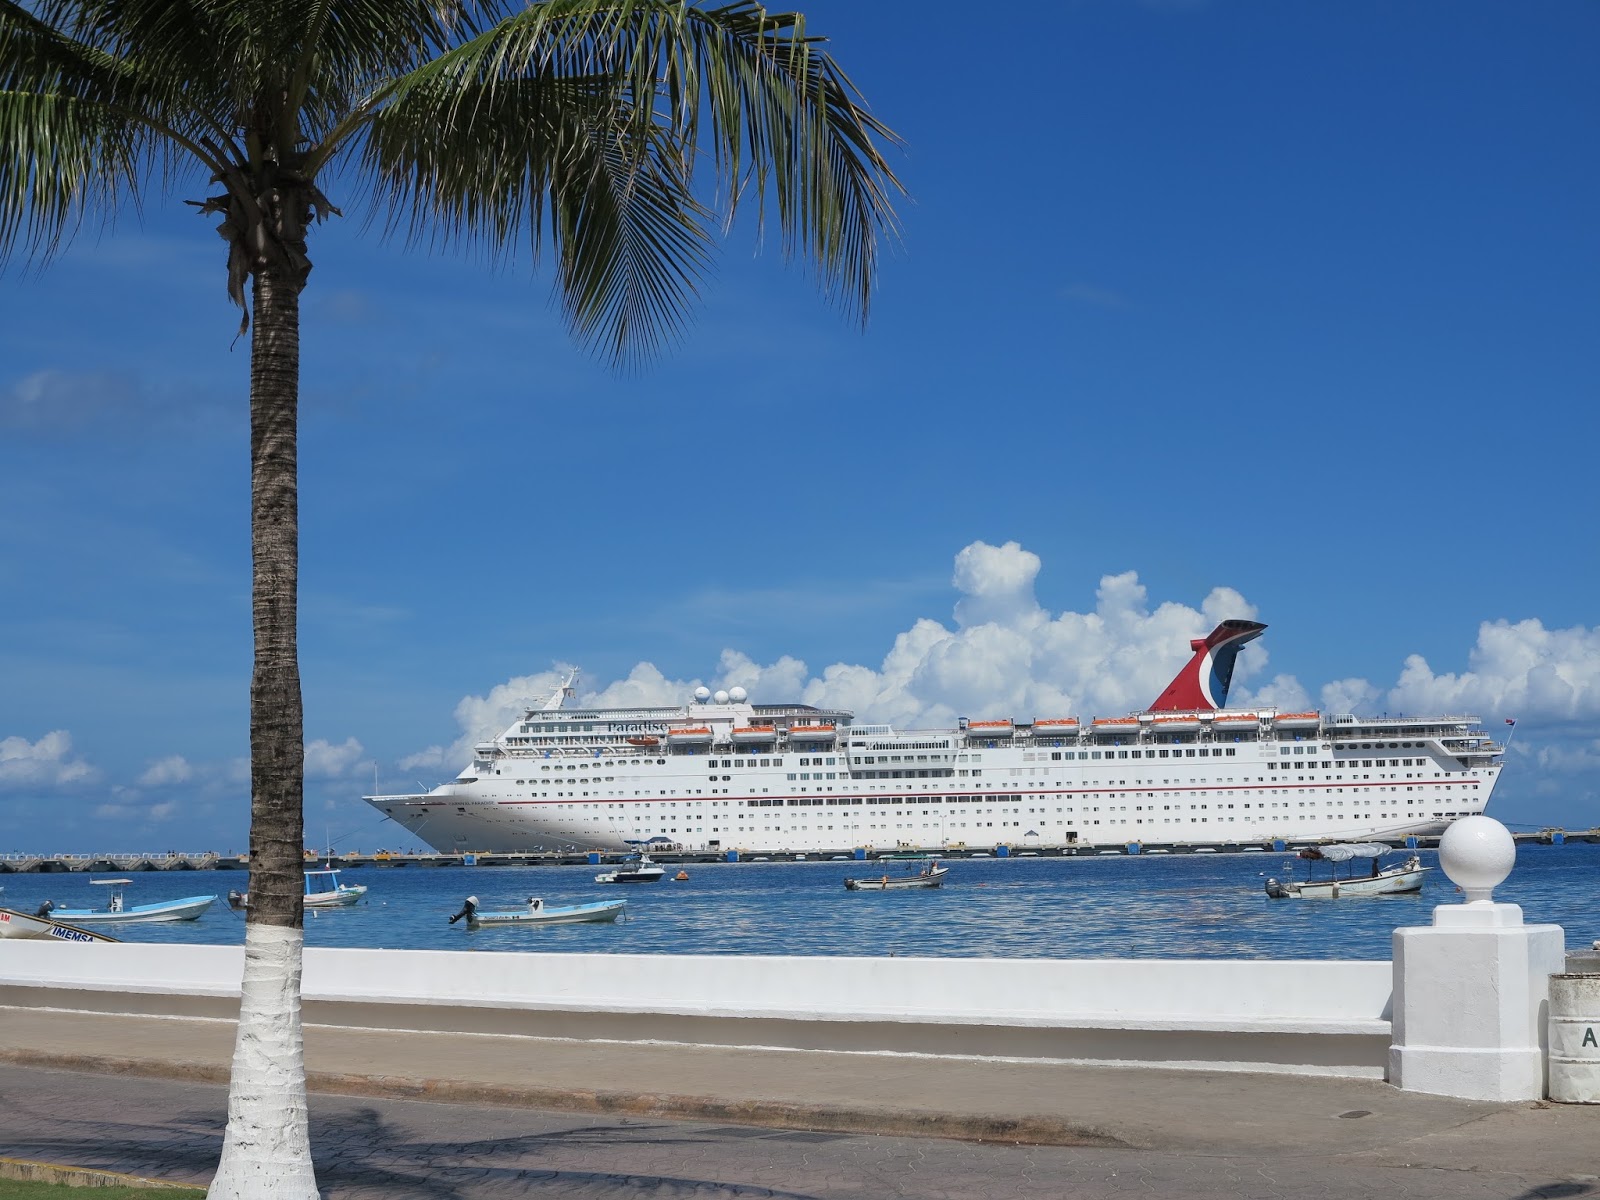 Our Carnival Cruise to Cozumel!